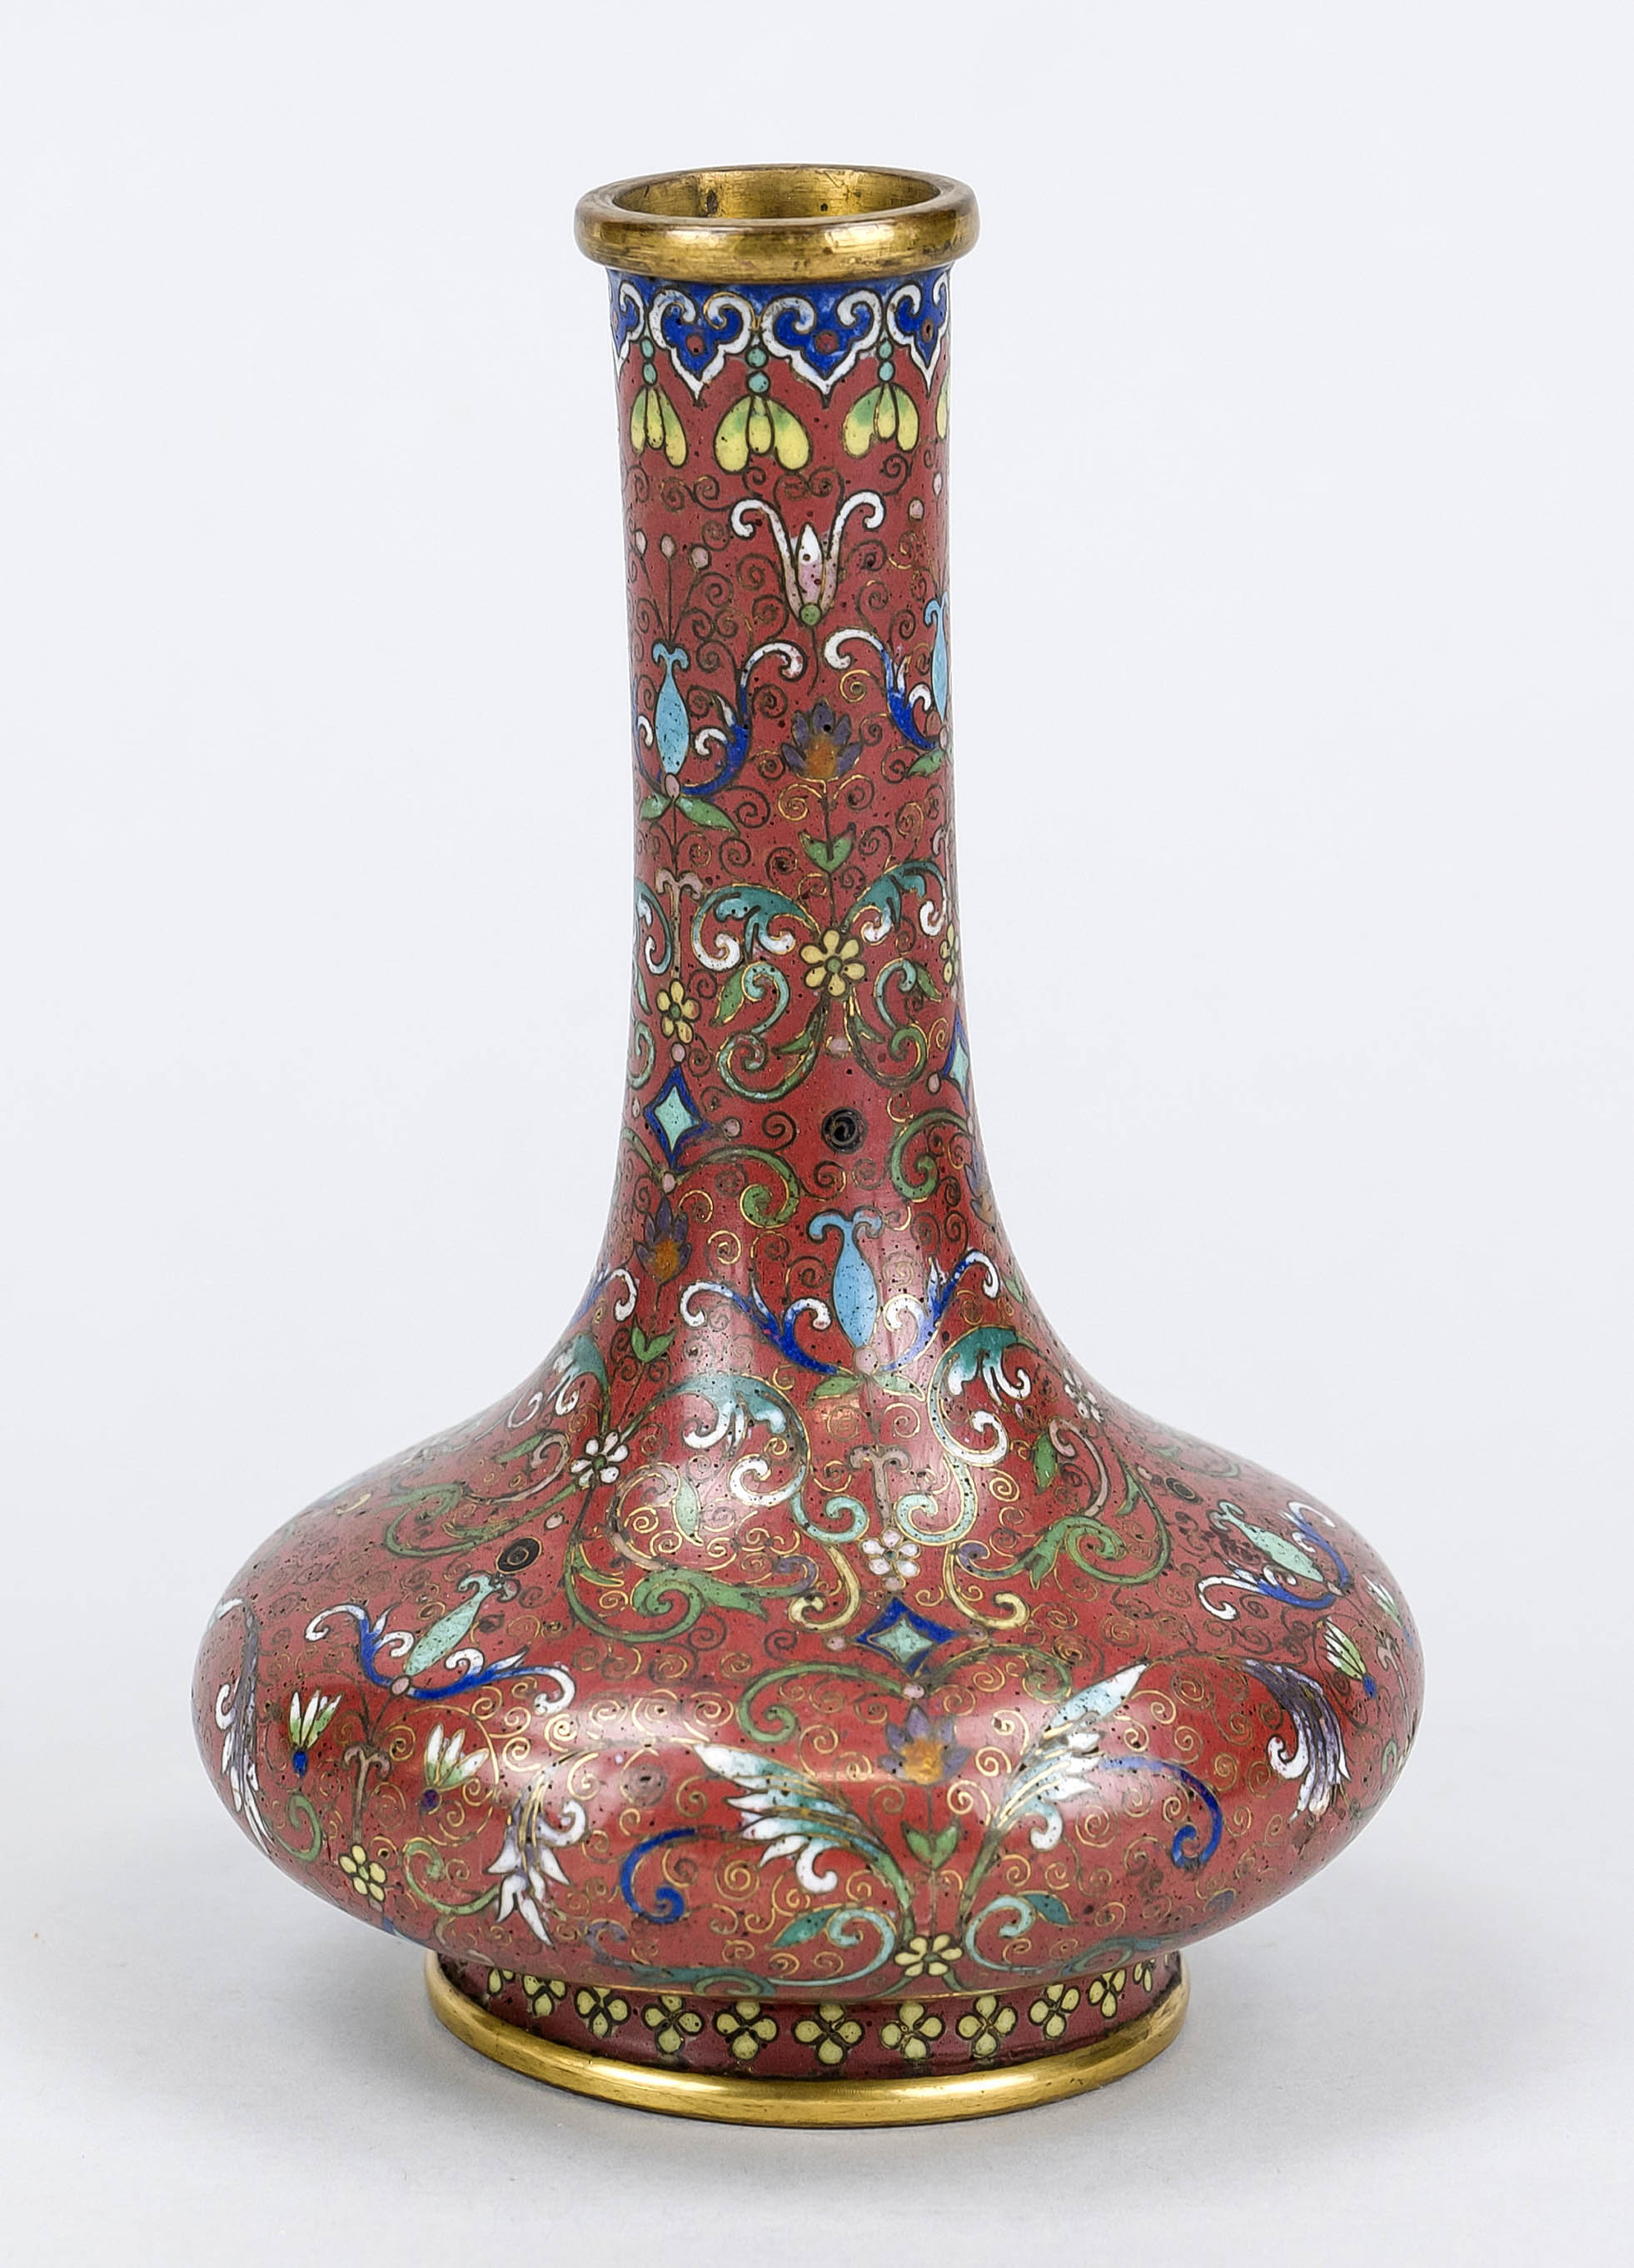 Small cloisonné vase, Japan/China, late 19th century, stylized tendrils and flowers on a dark red